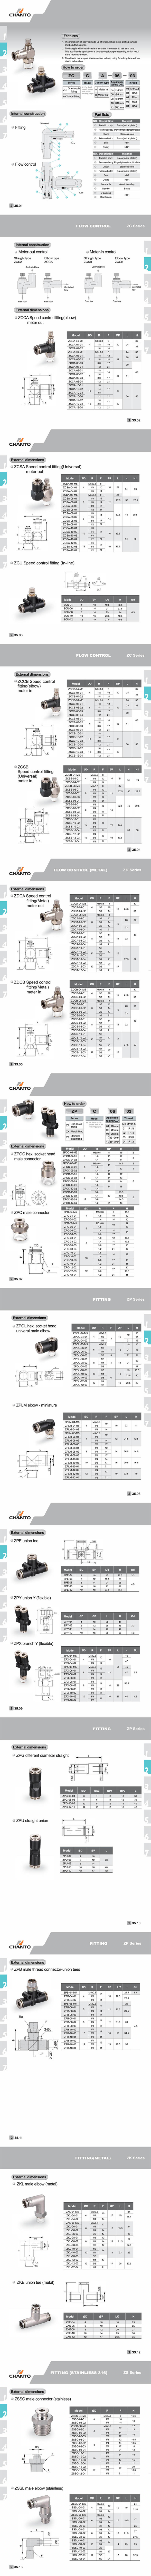 Z series Fitting/Flow Control